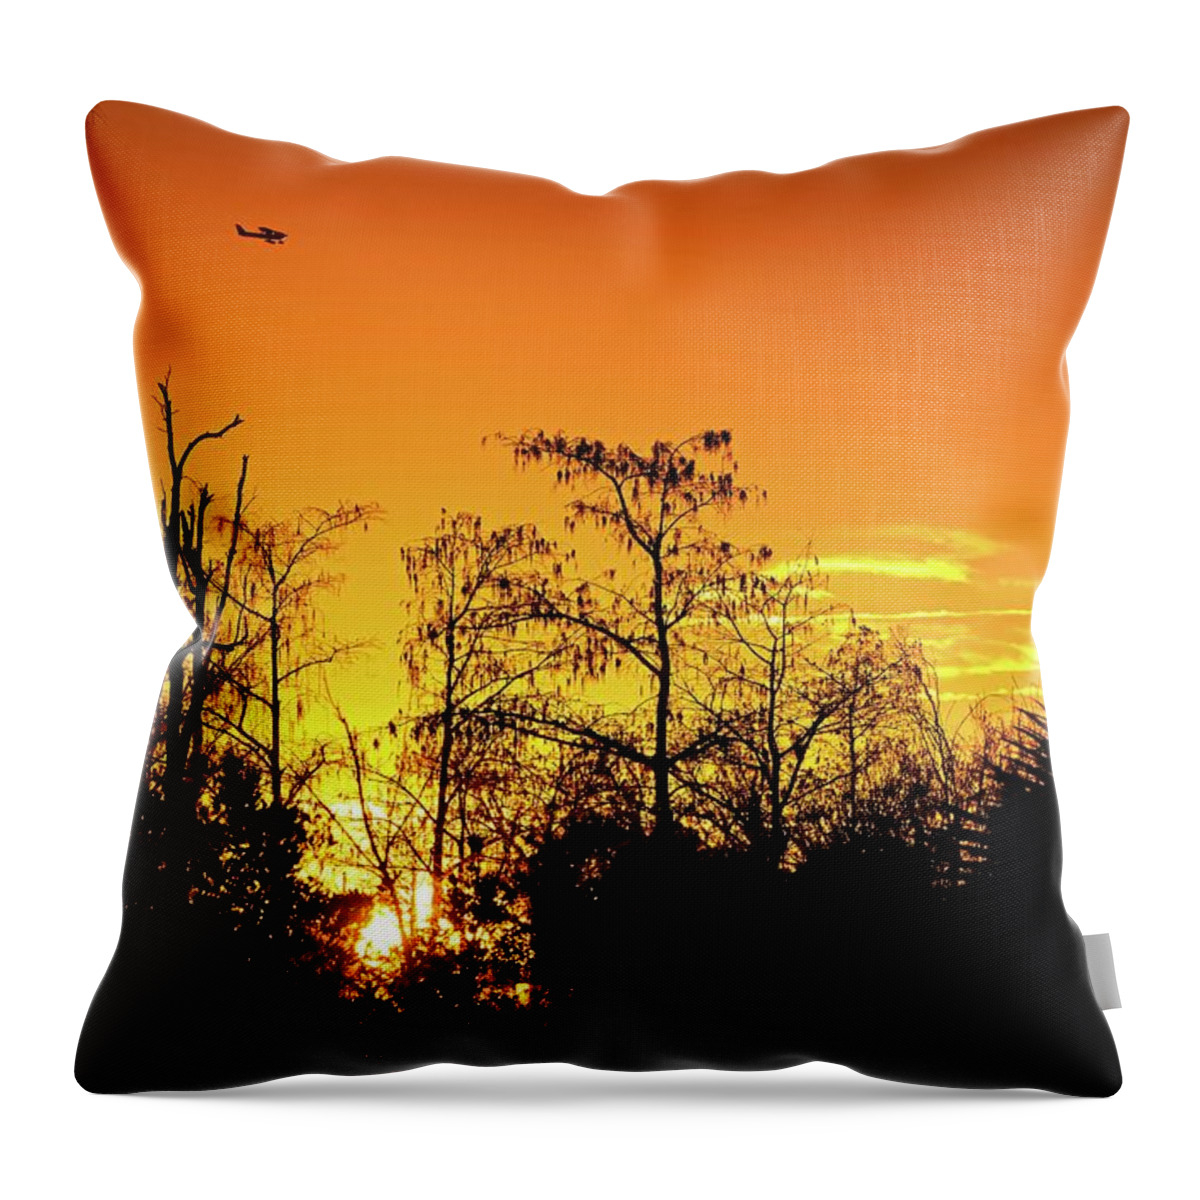 Airplane Throw Pillow featuring the photograph Cypress Swamp Sunset 3 by Steve DaPonte